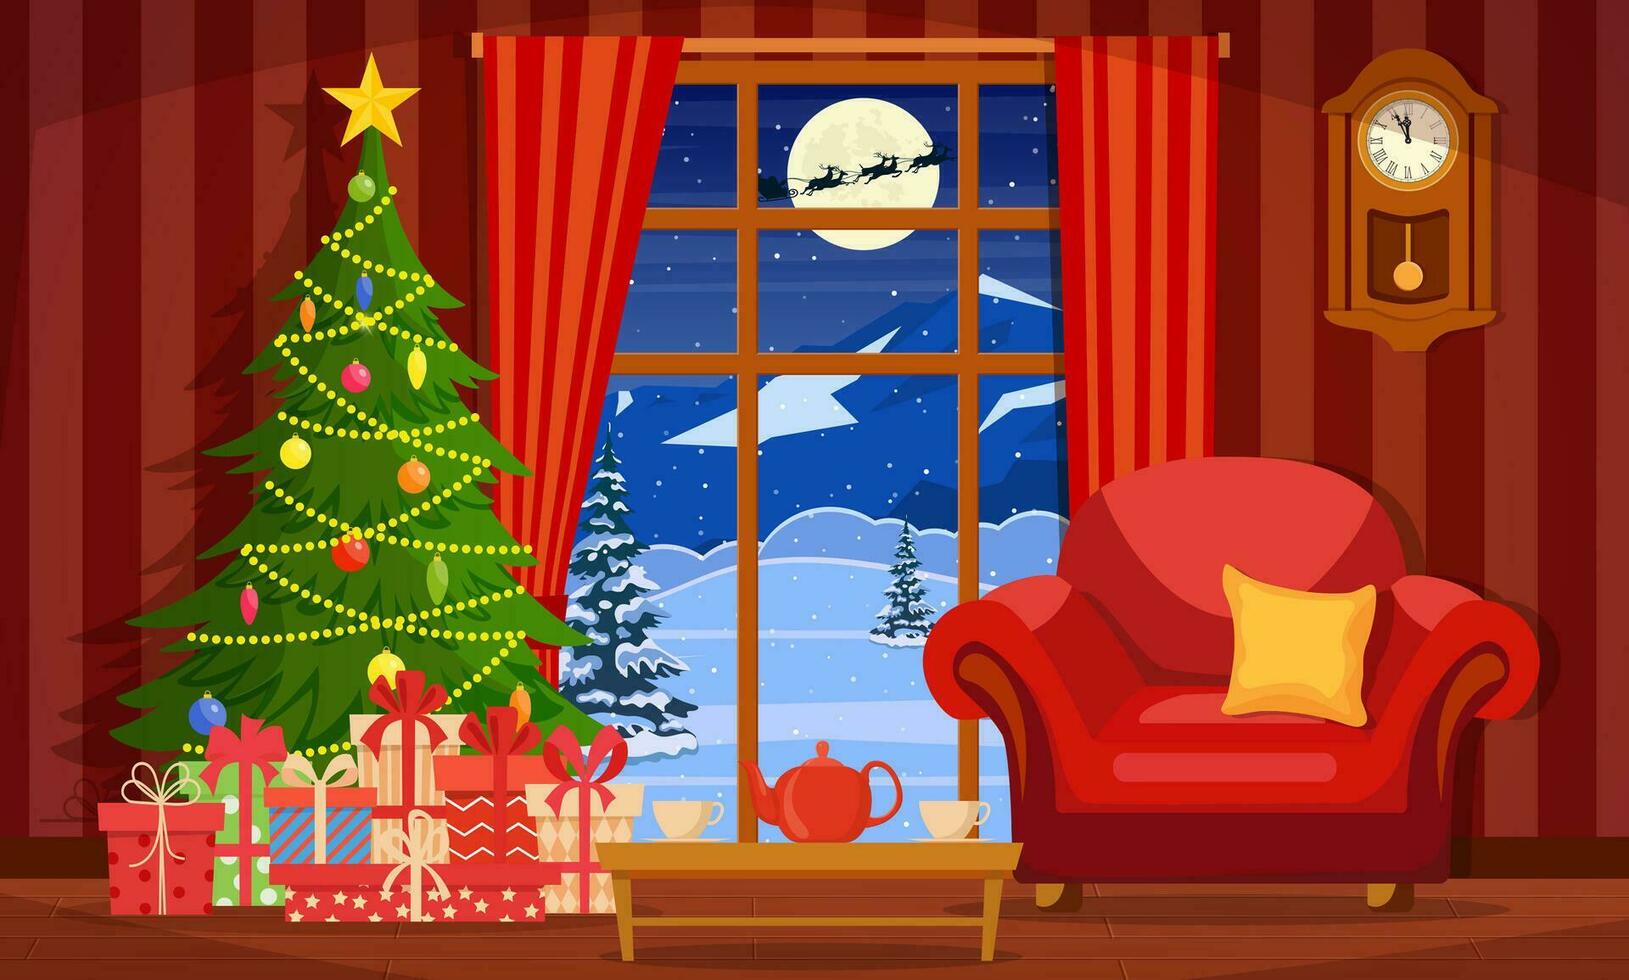 Cartoon cozy Interior of Living Room with Window, Armchair, Table, Christmas Tree. Happy New Year Decoration. Flat Vector Illustration